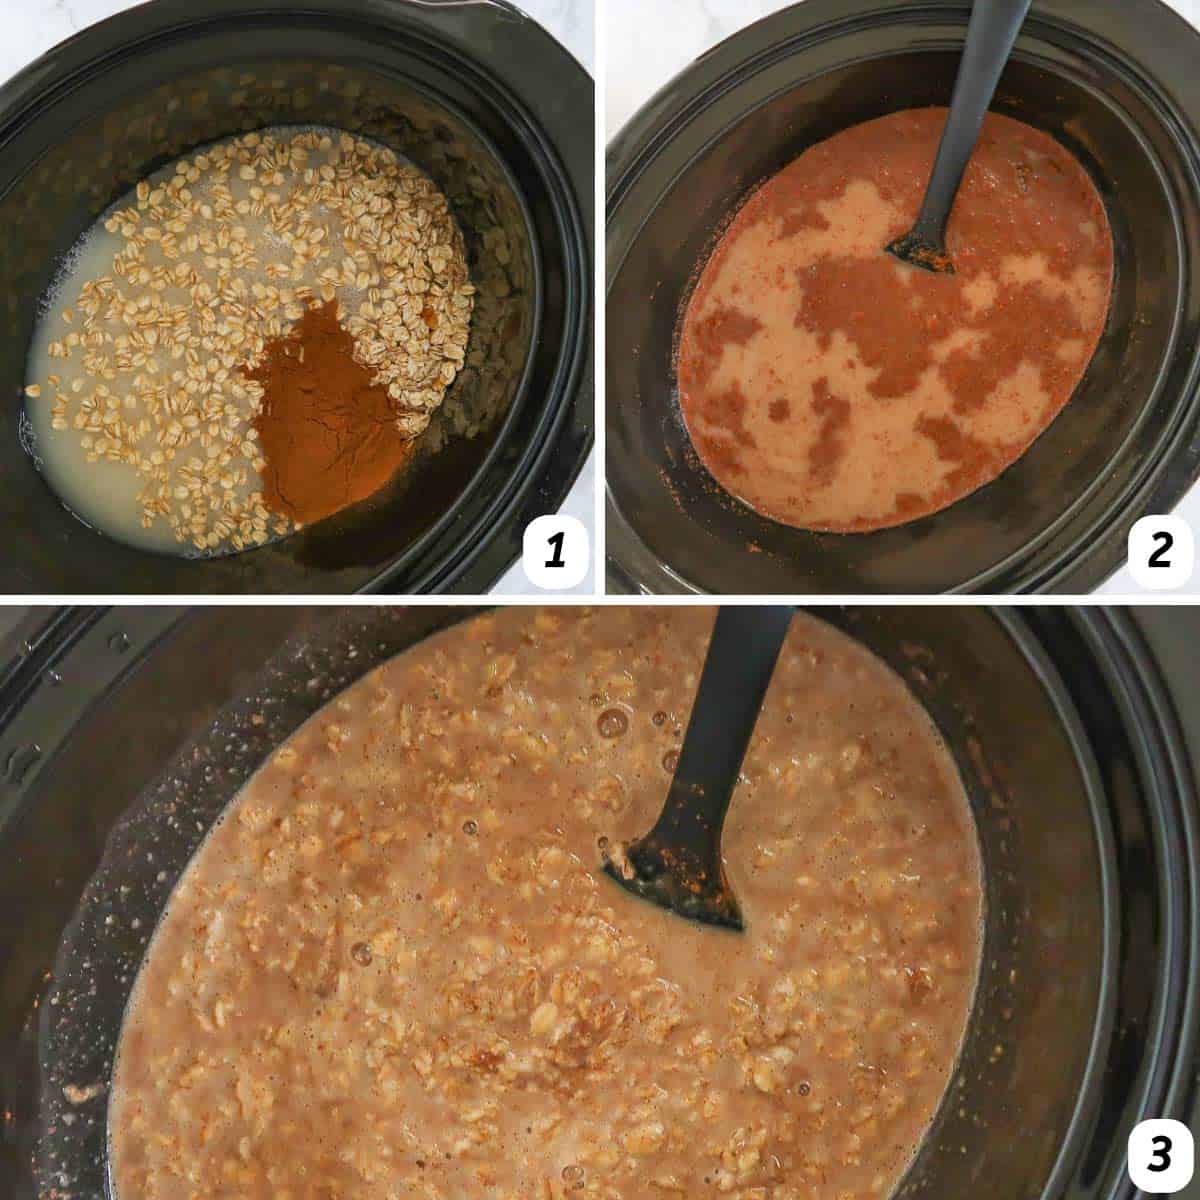 Three panel grid of process shots - gradually combining ingredients in the slow cooker and cooking.